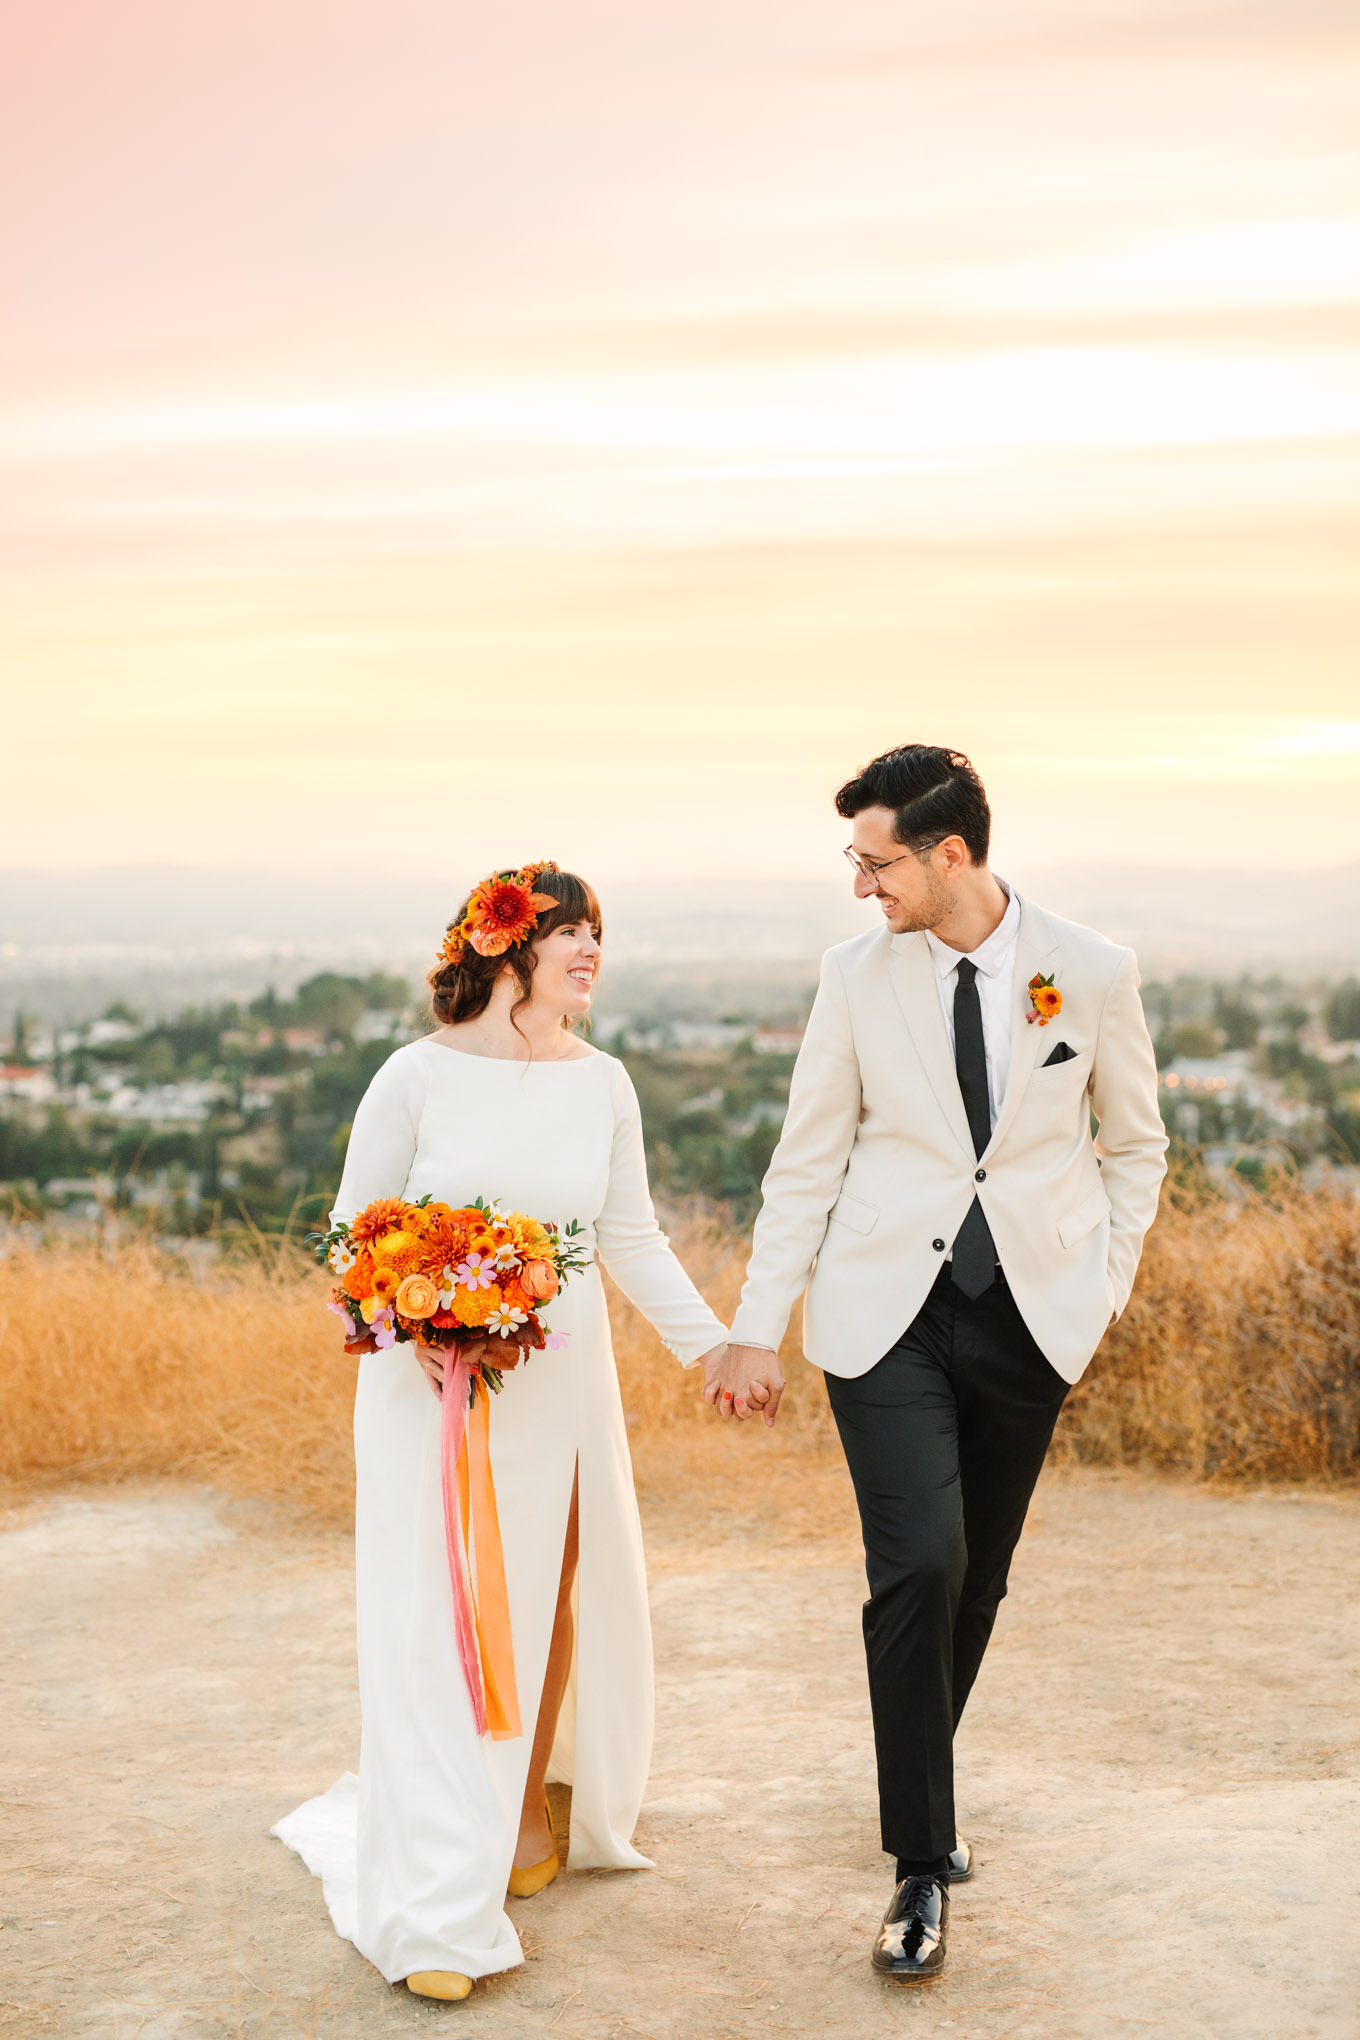 Groom in cream tux and bride with colorful autumn flowers | Engagement, elopement, and wedding photography roundup of Mary Costa’s favorite images from 2020 | Colorful and elevated photography for fun-loving couples in Southern California | #2020wedding #elopement #weddingphoto #weddingphotography #microwedding   Source: Mary Costa Photography | Los Angeles